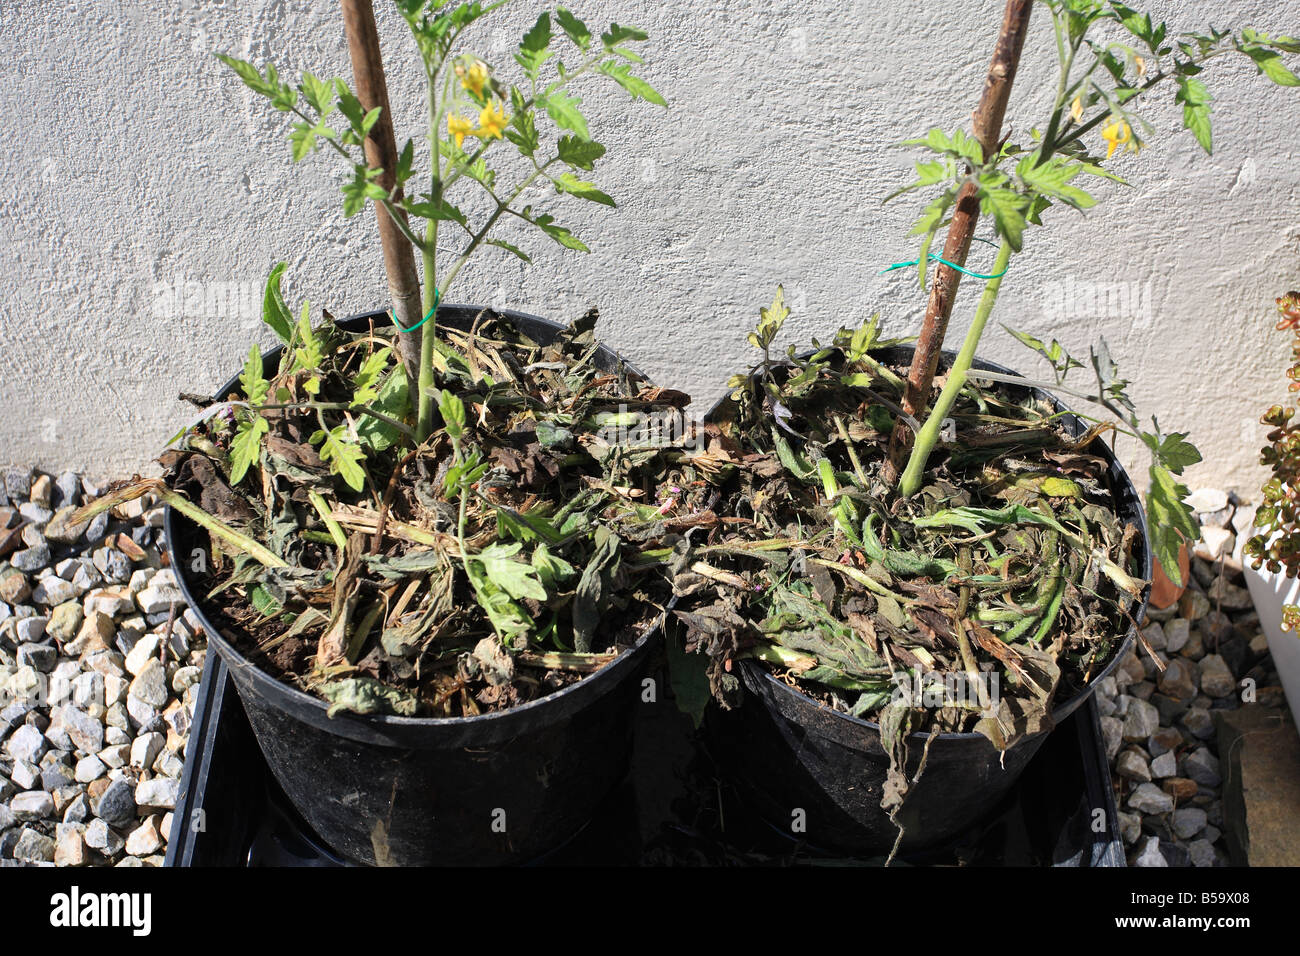 MULCHING TOMATOES GROWING IN POTS WITH COMFREY Stock Photo